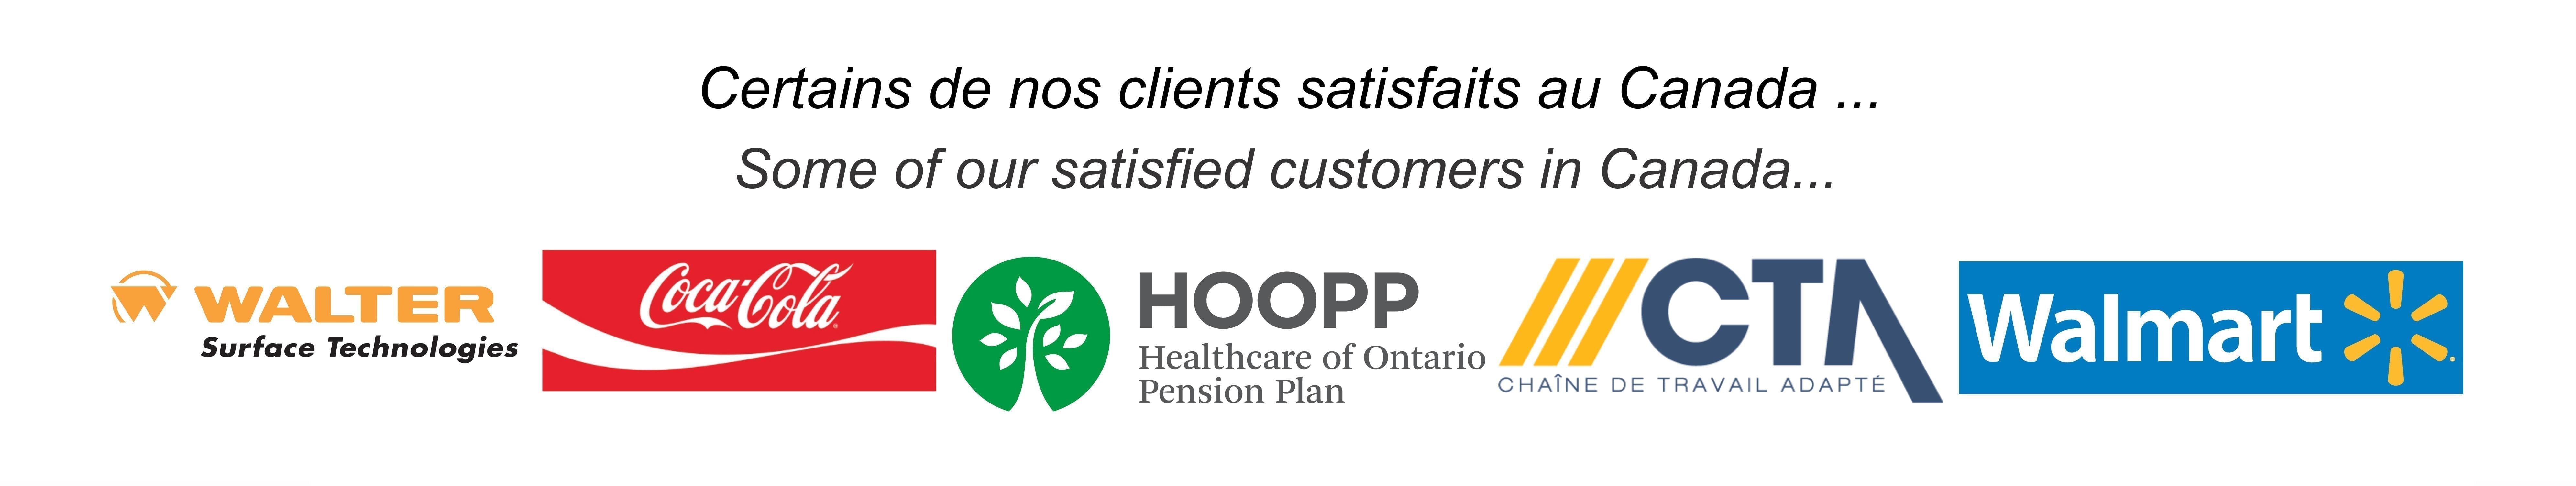 SATISFIED ASSET TAGS CUSTOMERS IN CANADA